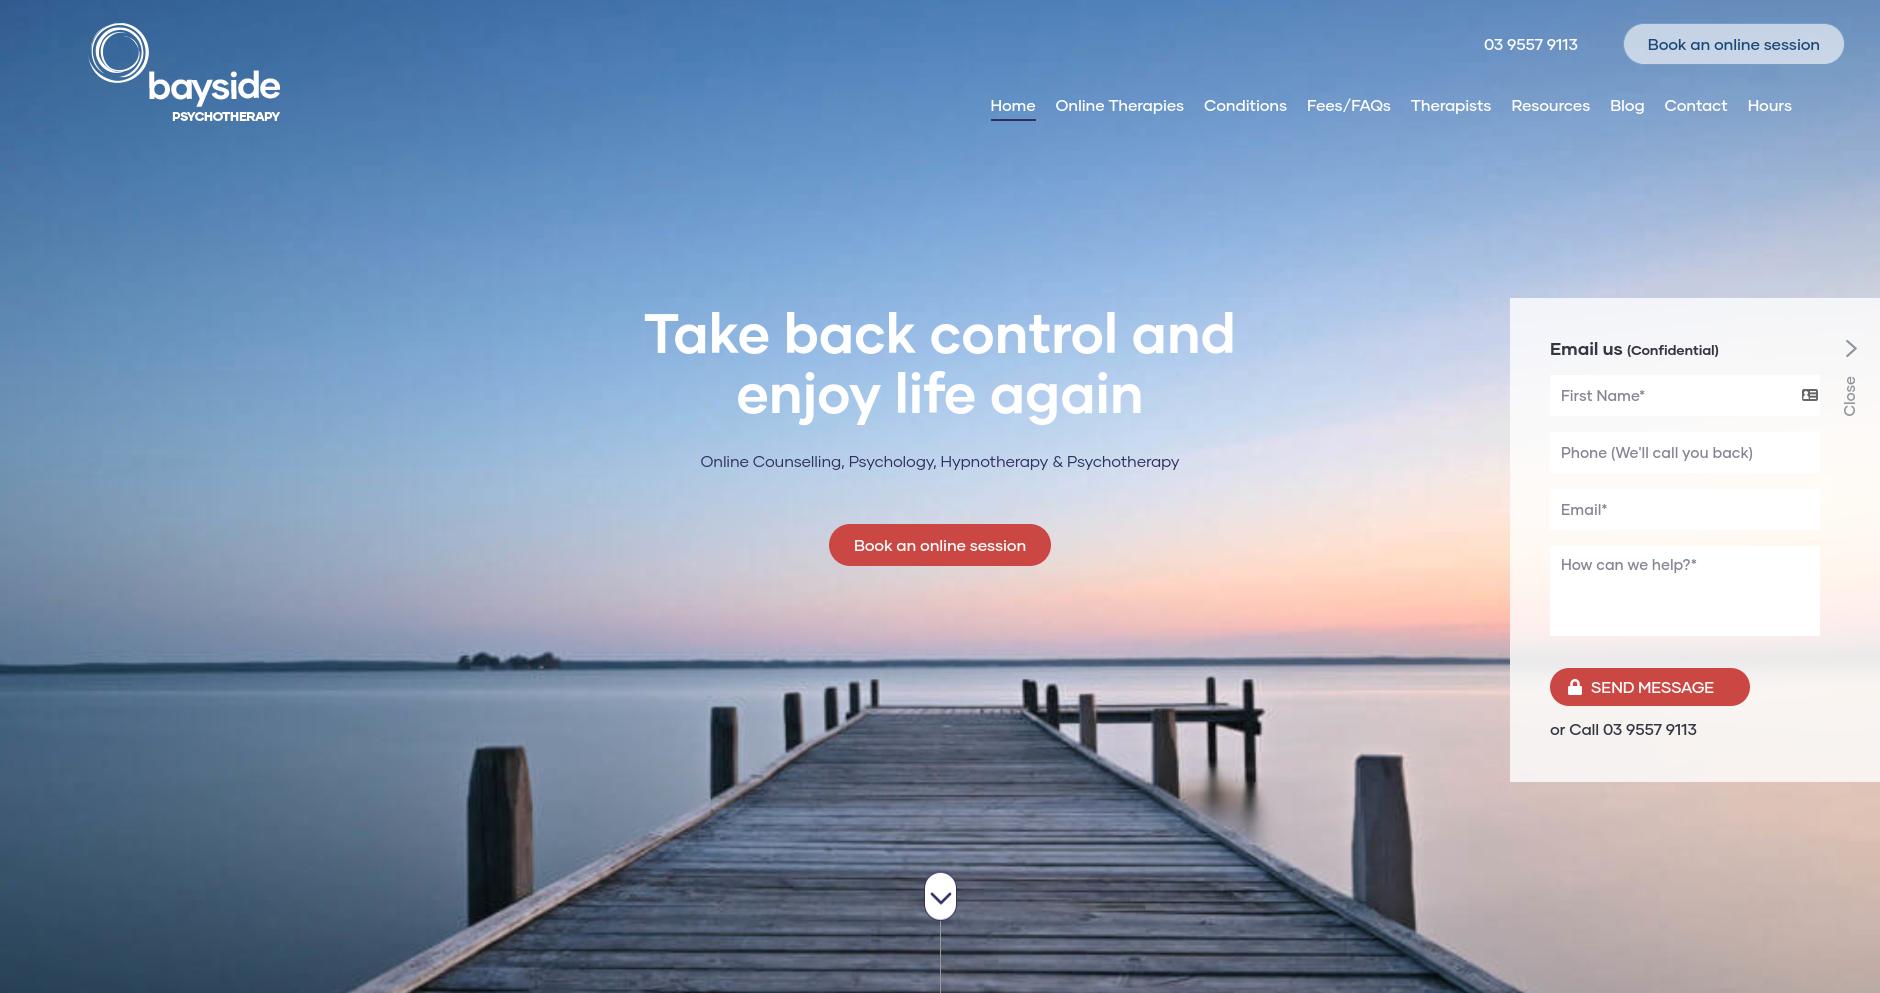 Bayside Psychotherapy home page design